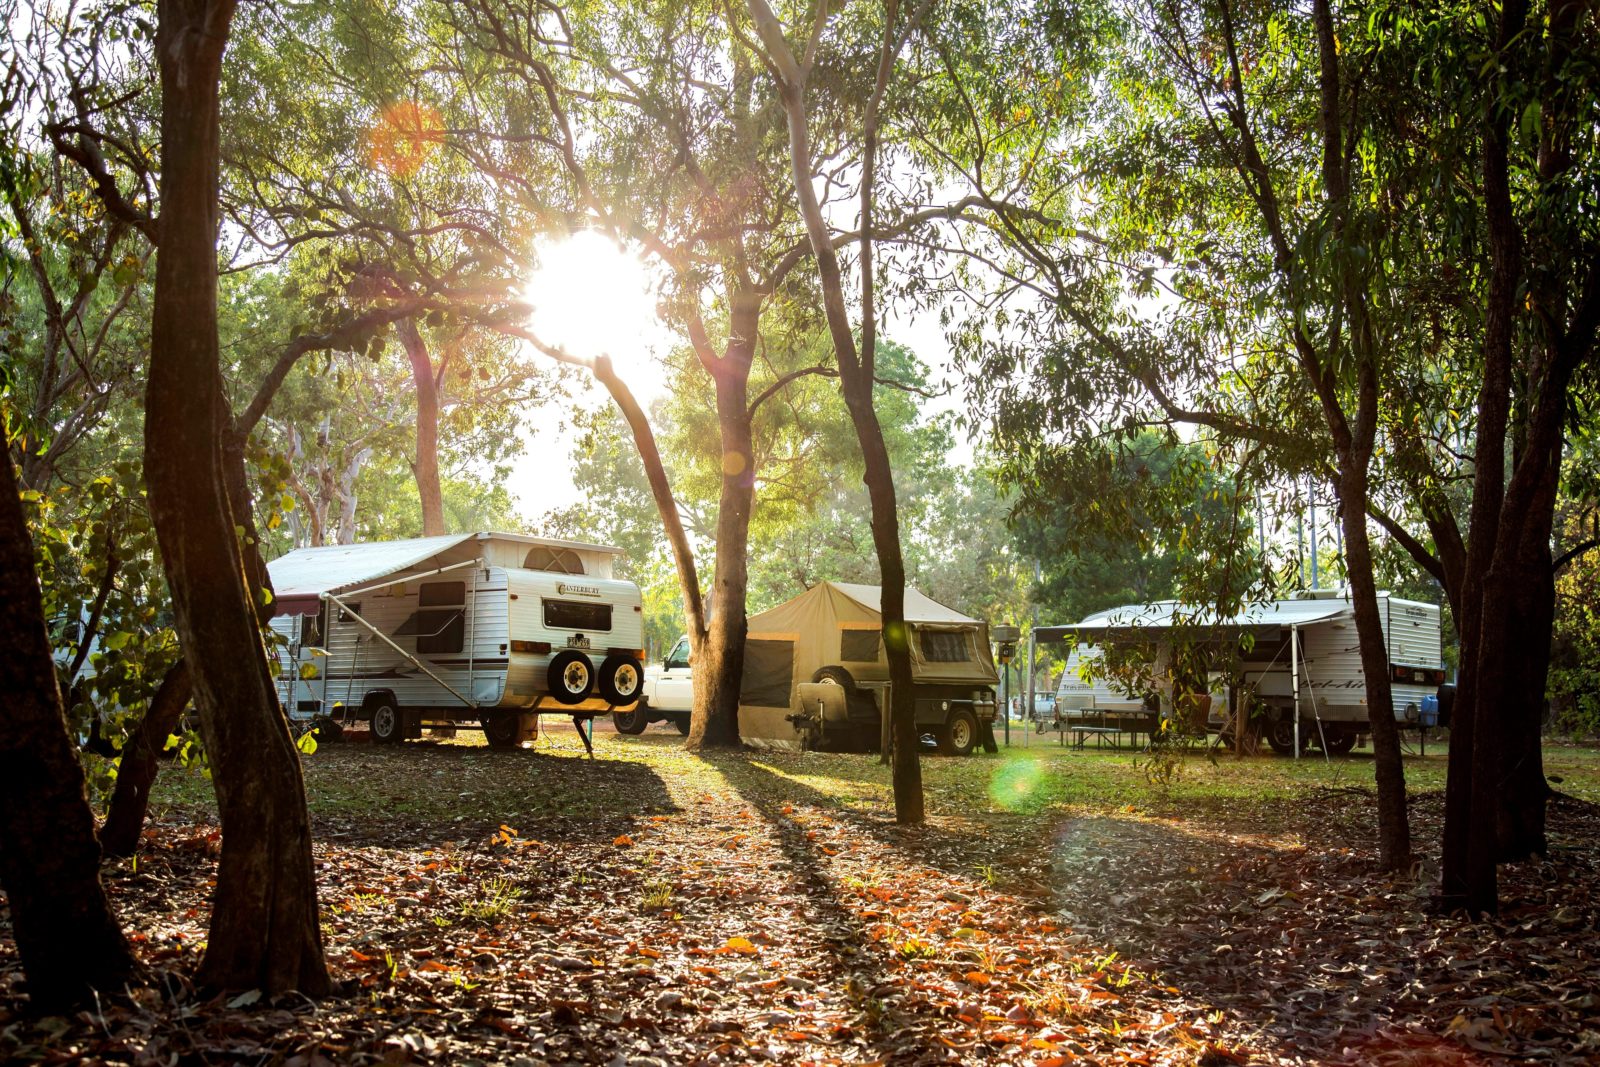 Camping beside the billabong under the trees